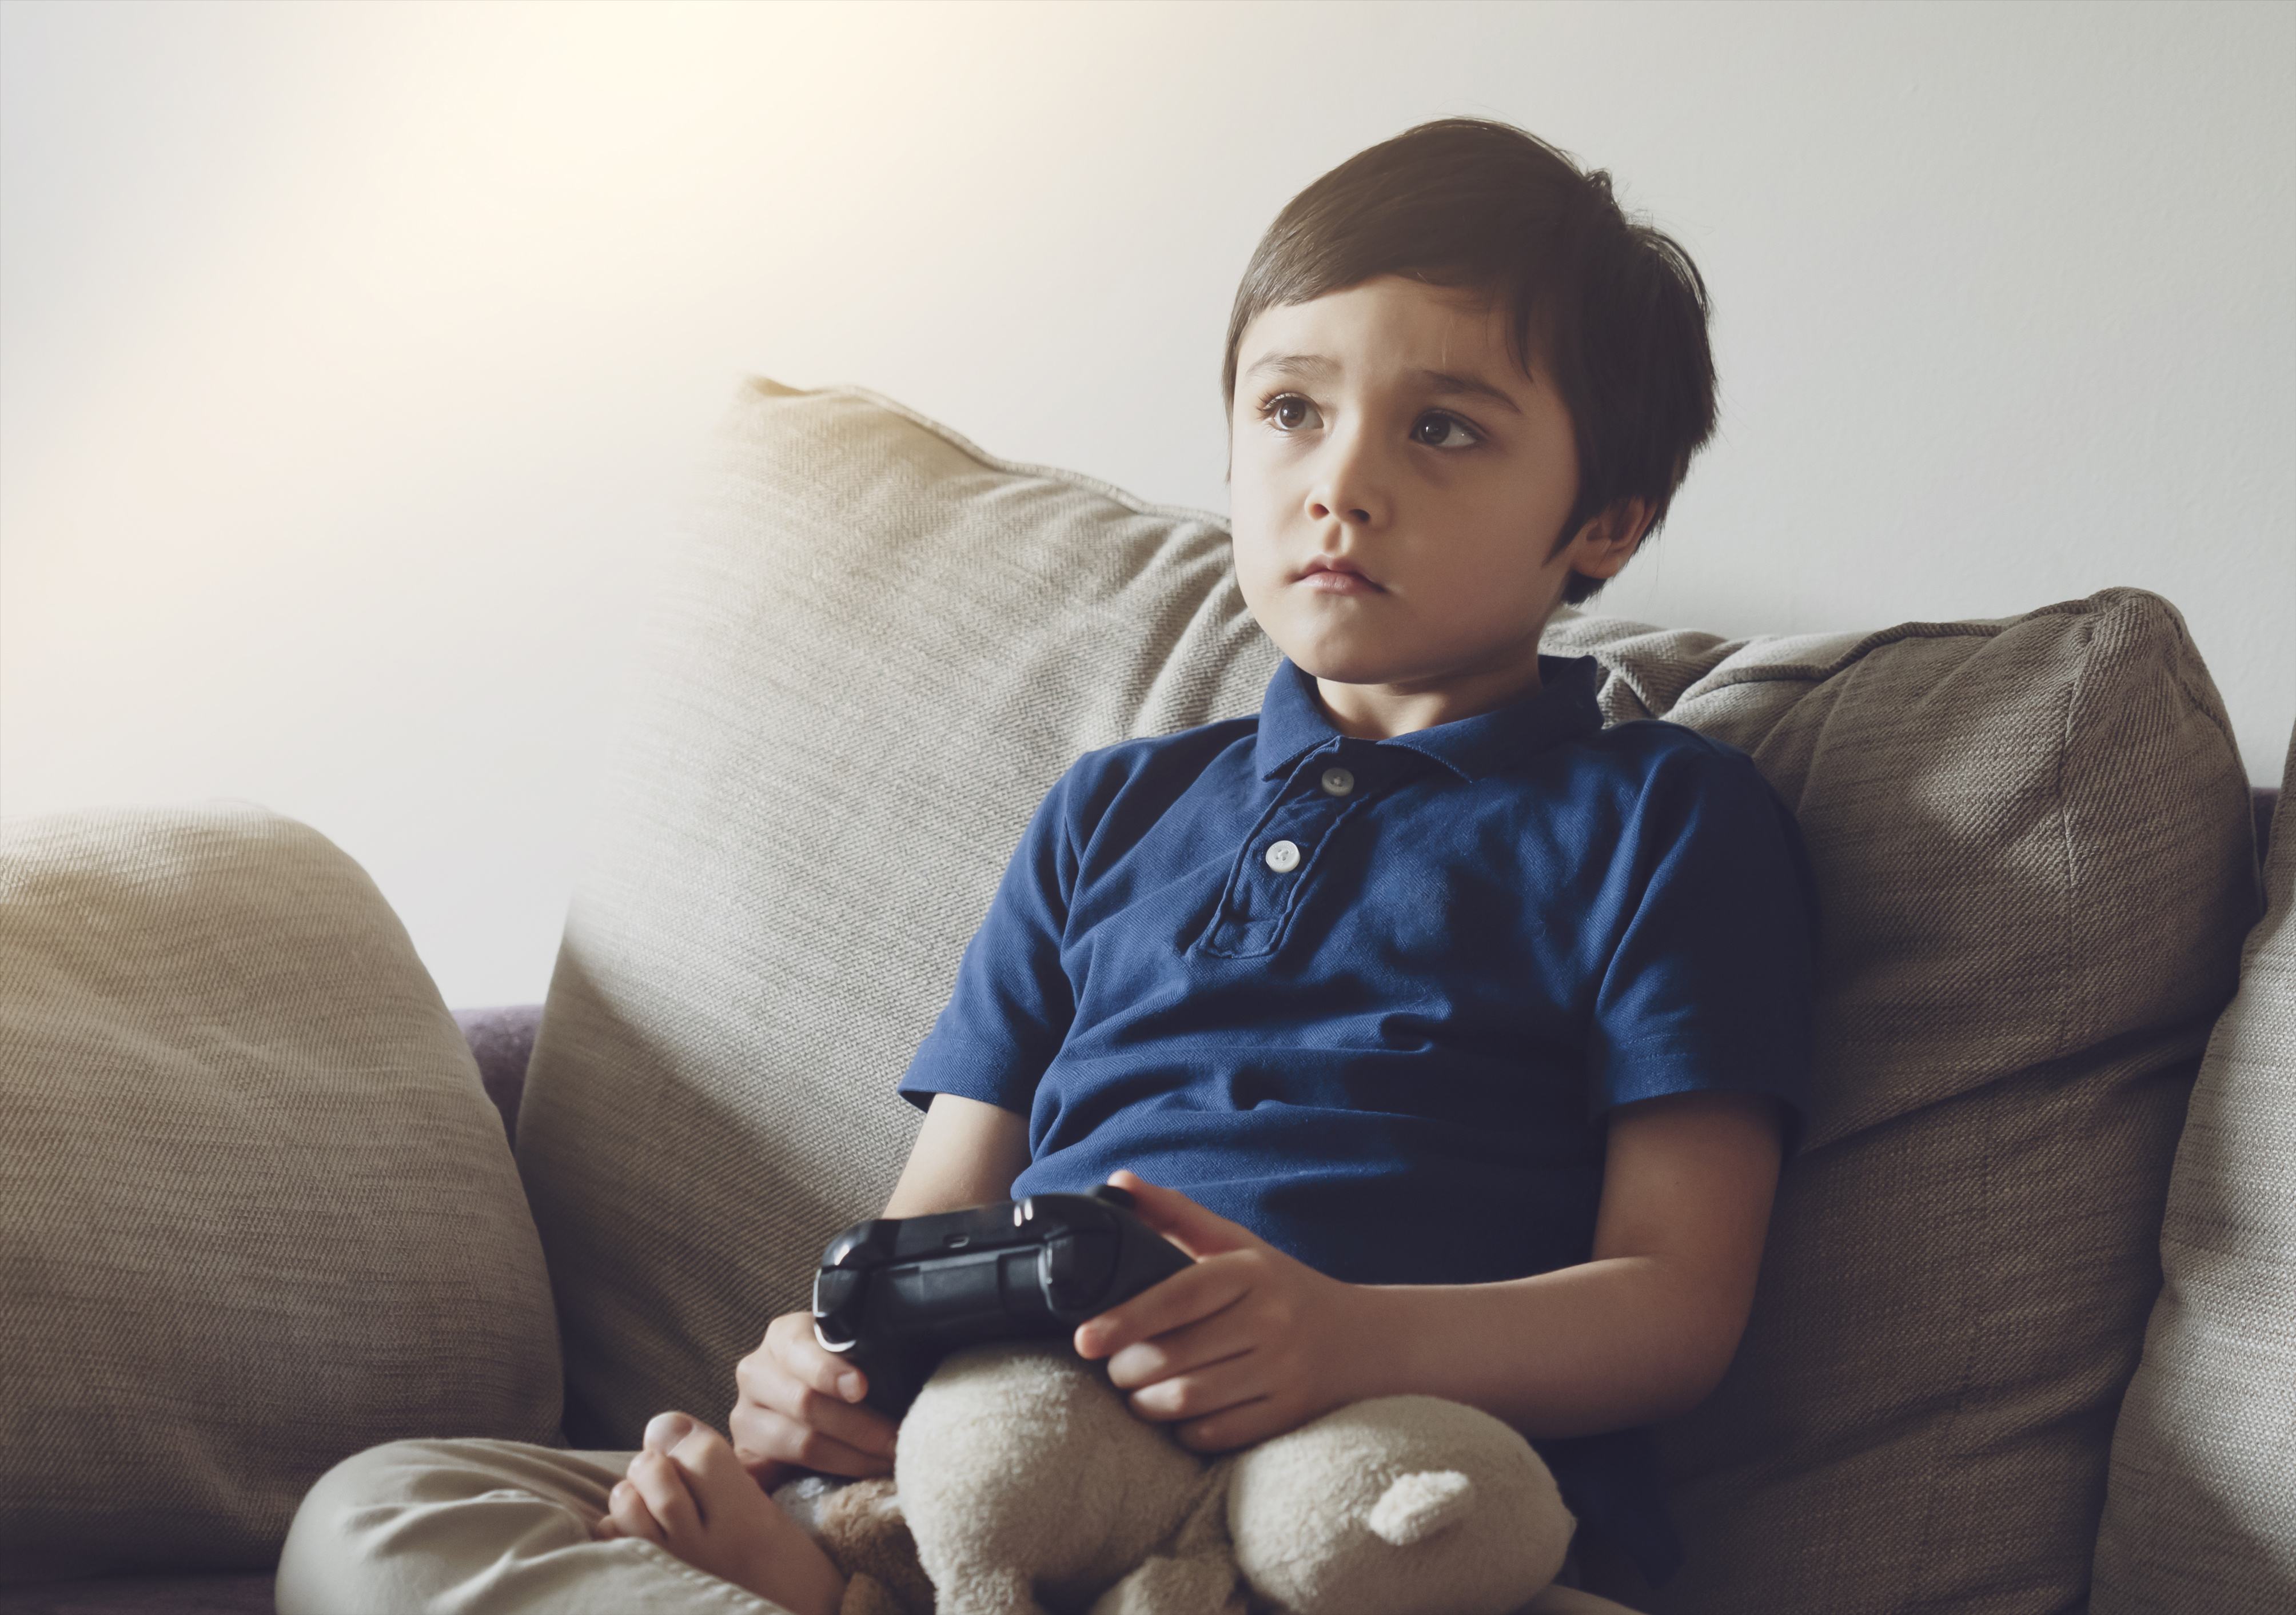 7 Ways Parents Can Better Protect Their Online-Gamer Offspring